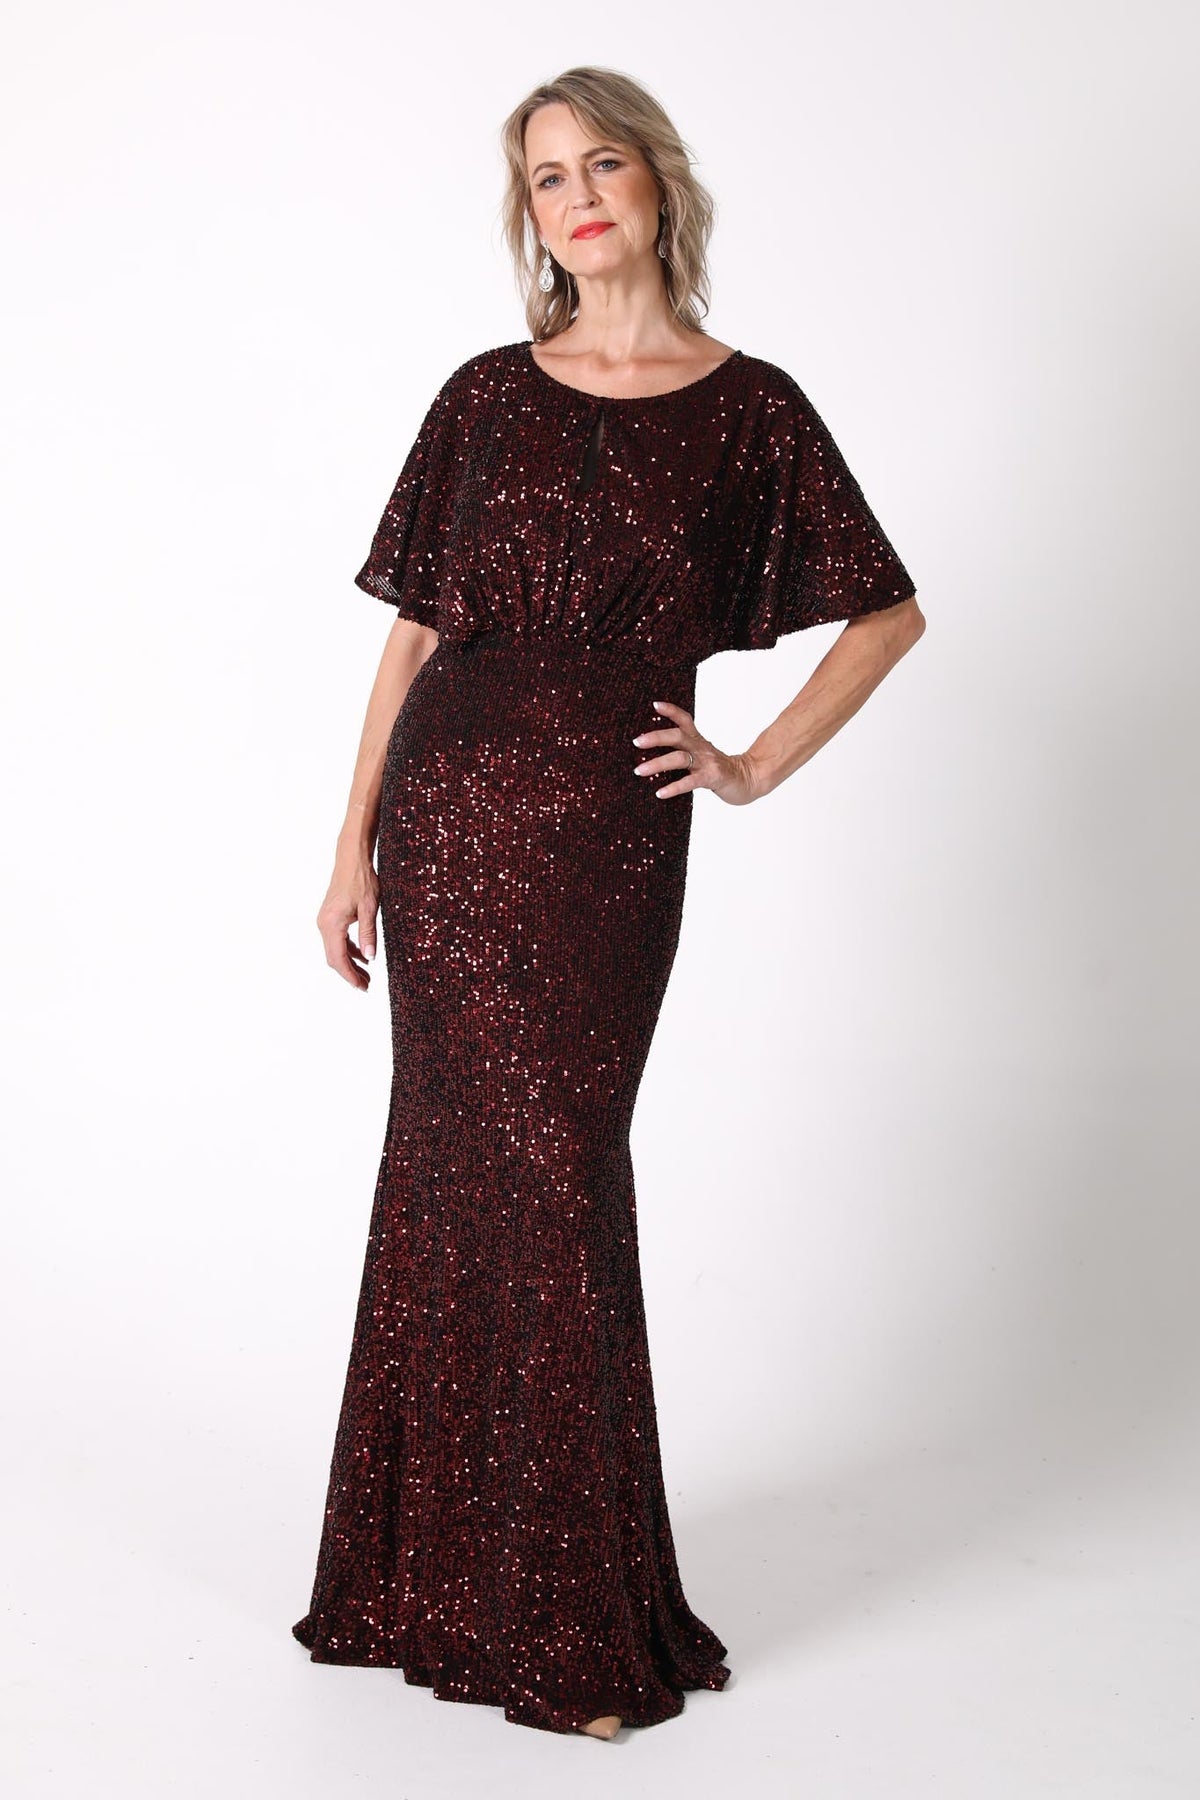 Mother of The Bride Sequin Fitted Full Length Maxi Dress with Round Neck and Butterfly Sleeves in Burgundy Deep Red